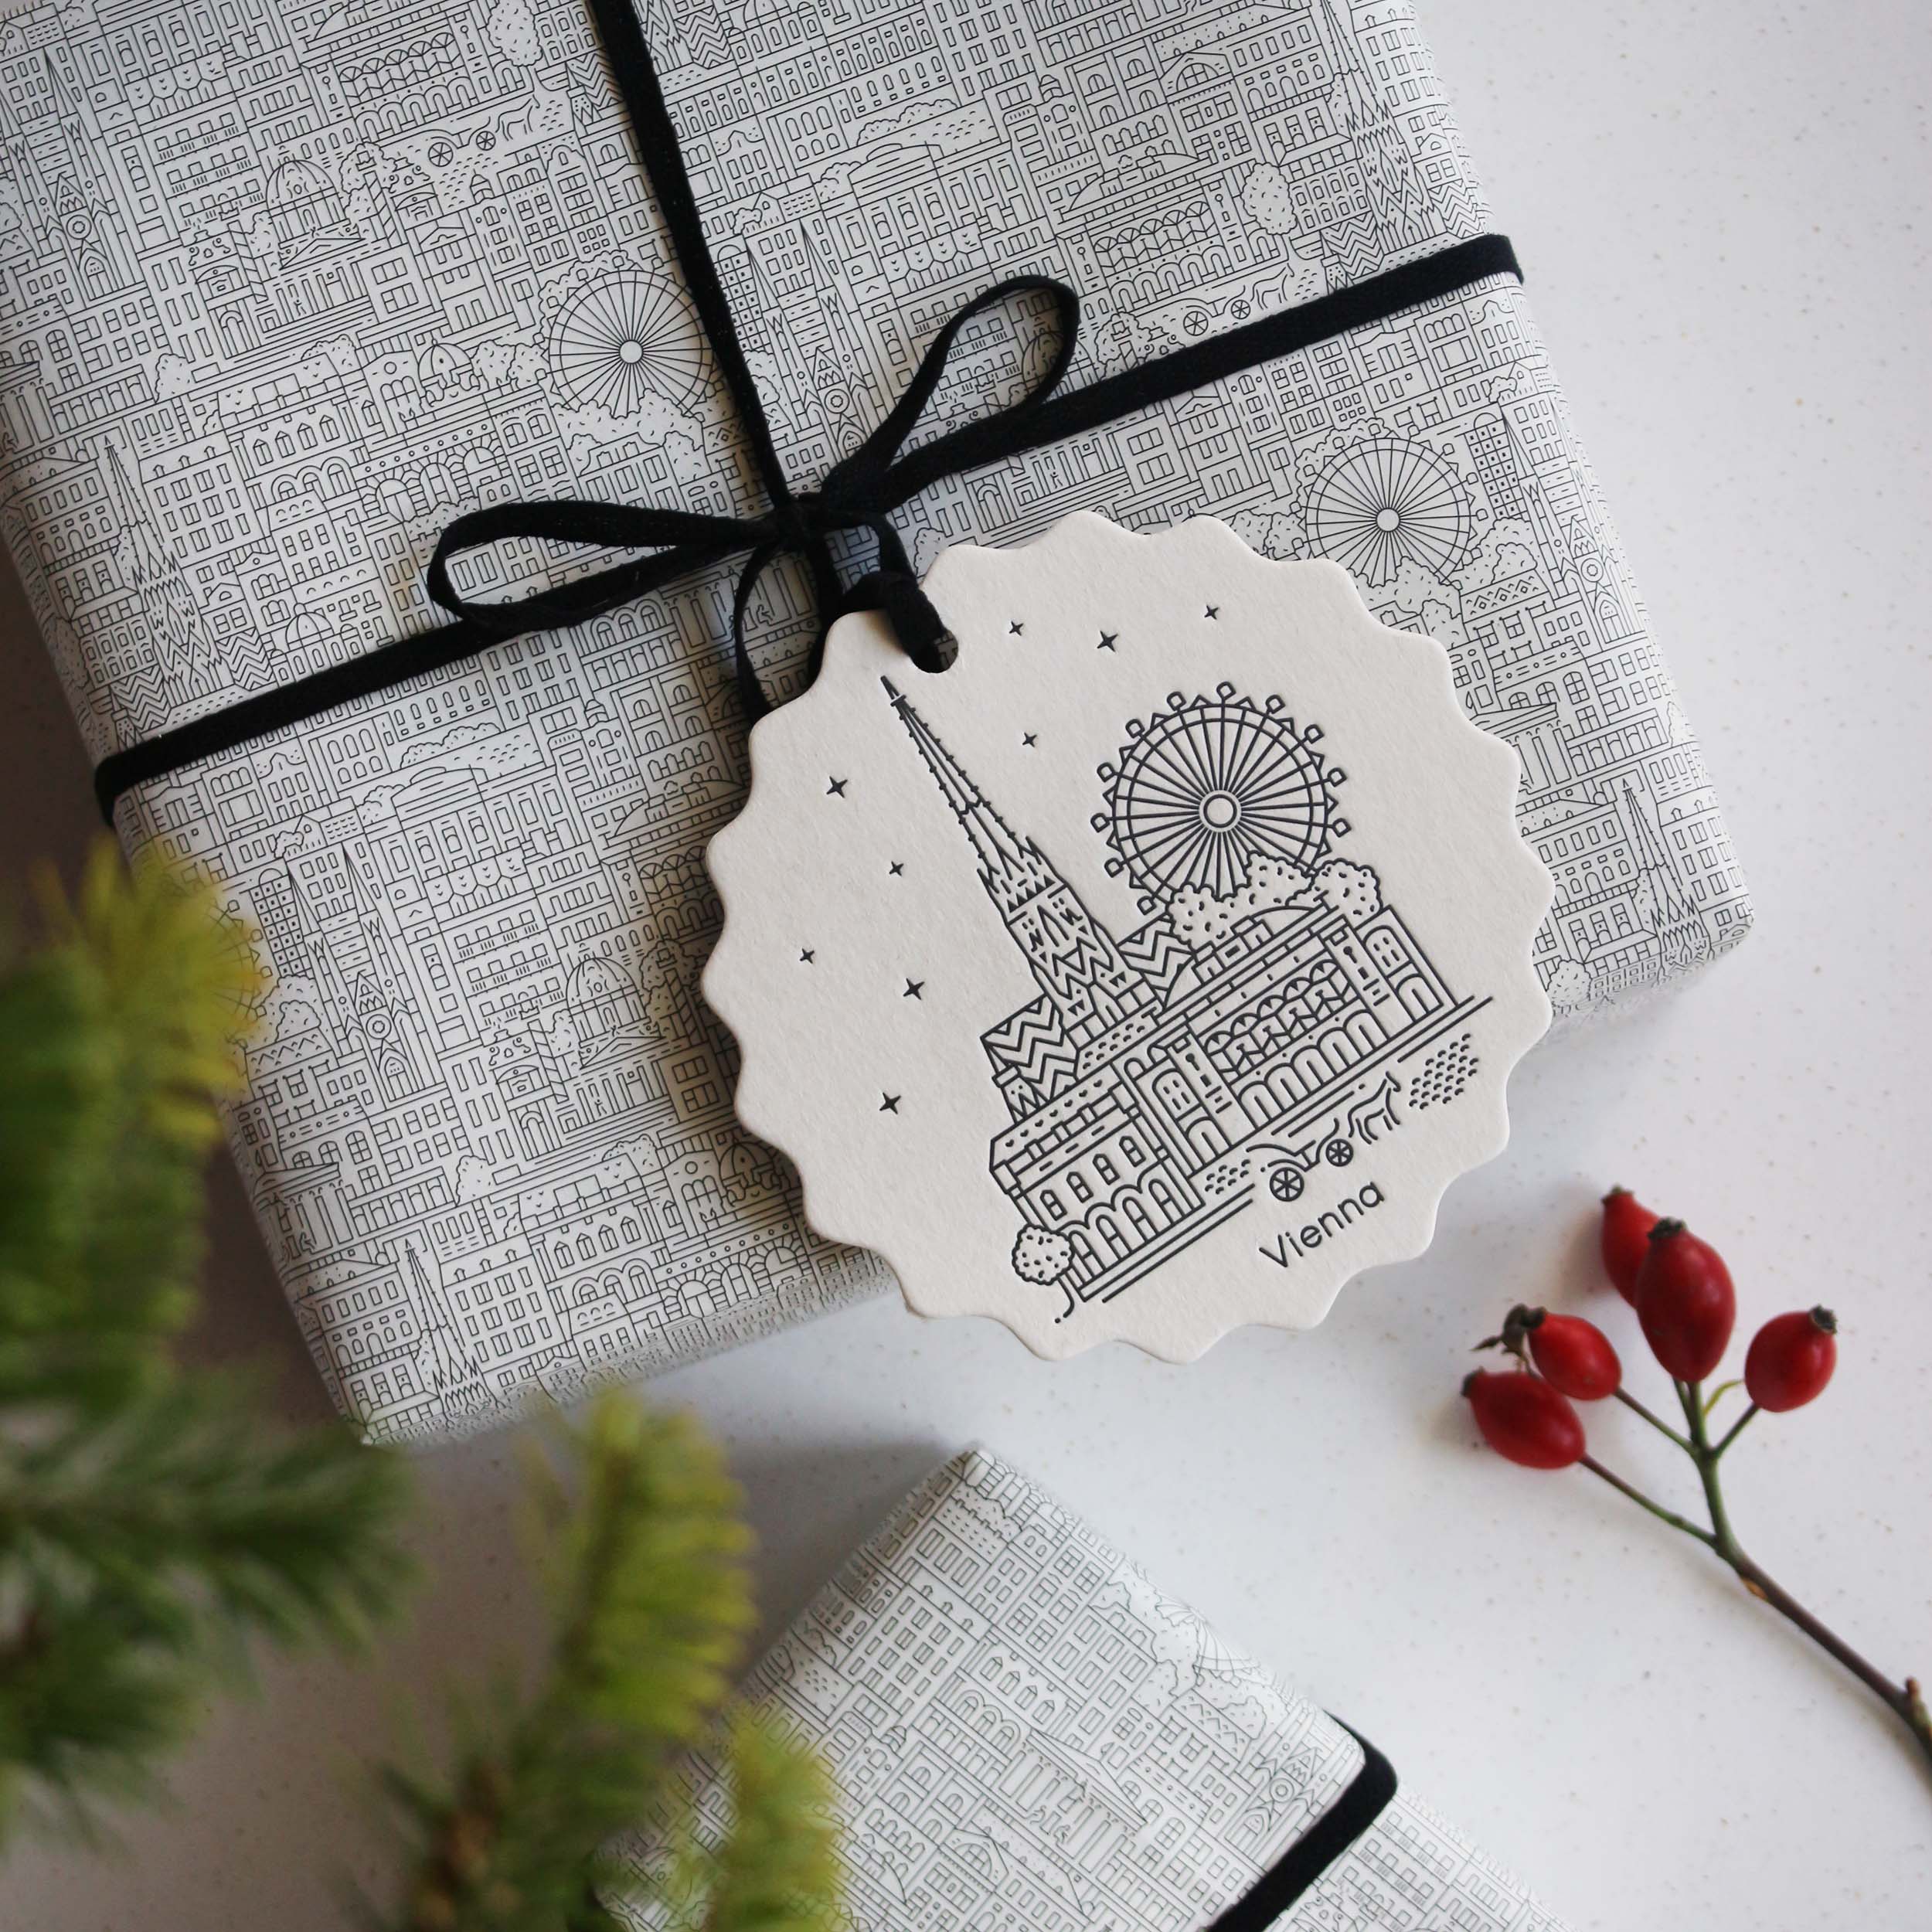 Vienna Gift Wrap by The City Works